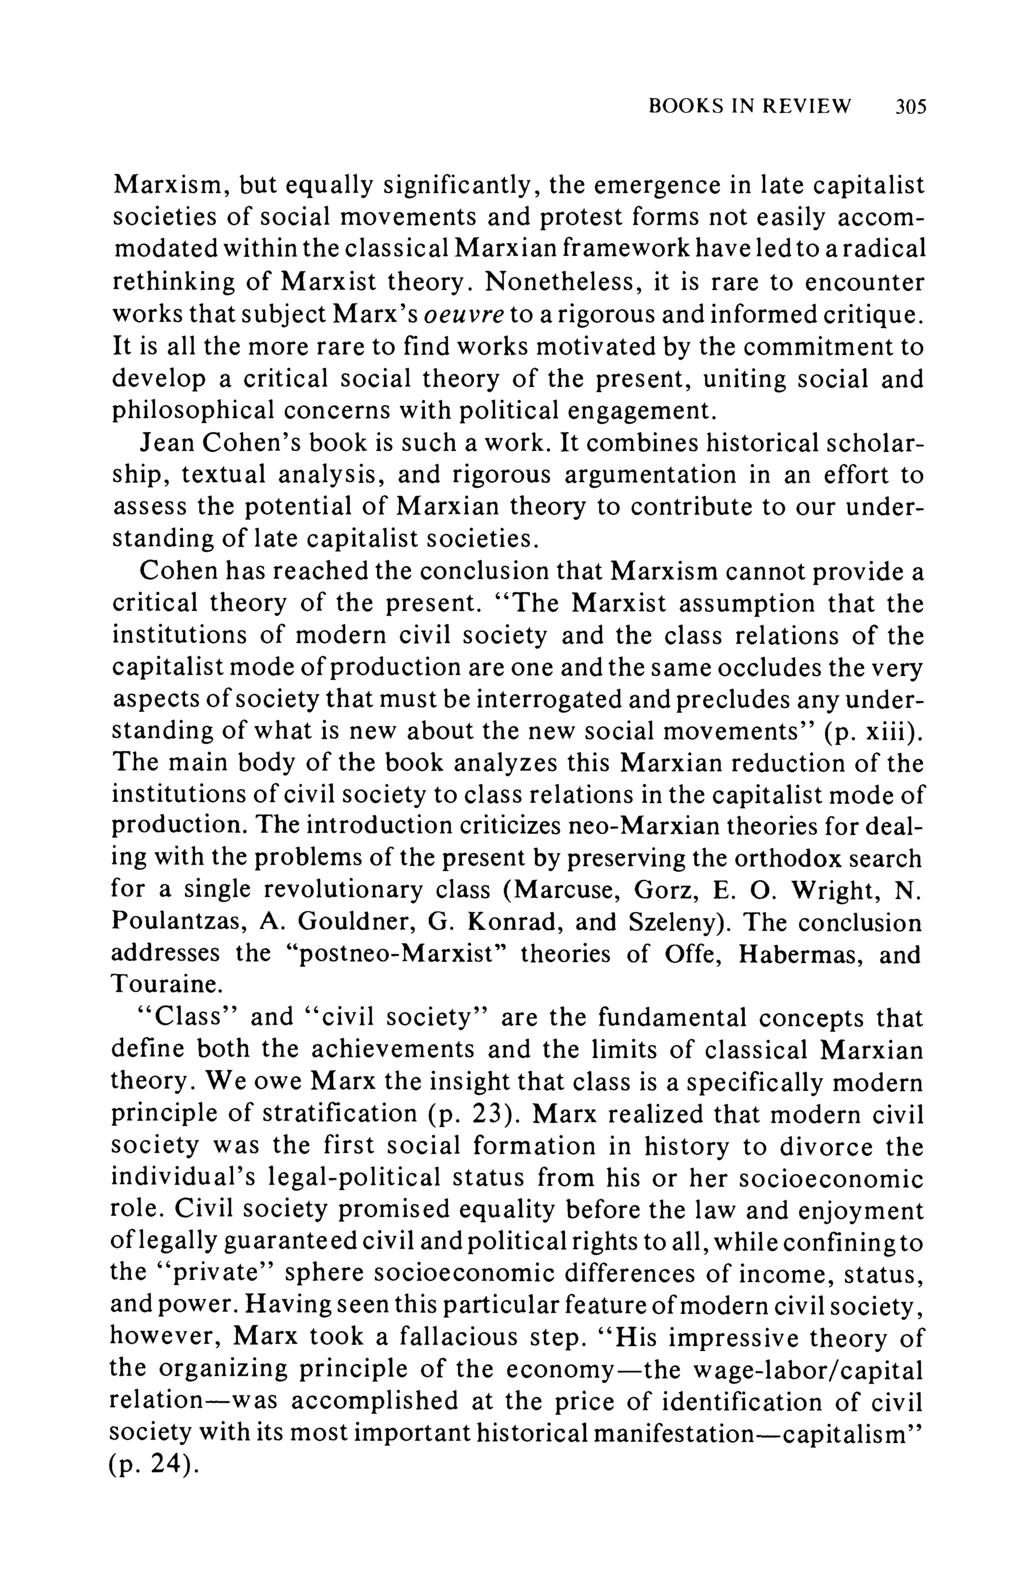 BOOKS IN REVIEW 305 Marxism, but equally significantly, the emergence in late capitalist societies of social movements and protest forms not easily accommodated within the classical Marxian framework